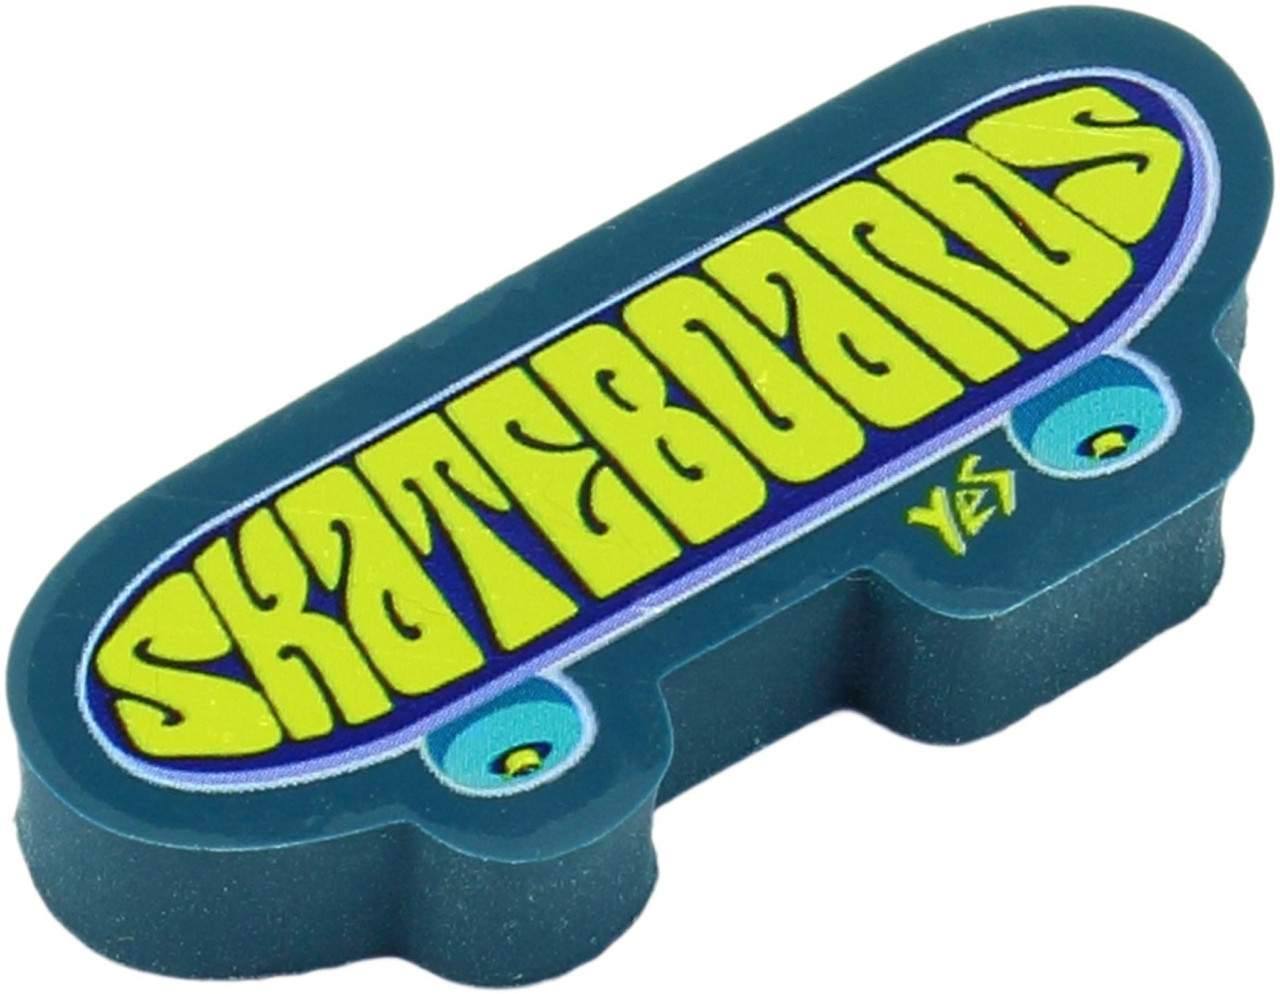 Гумка "Yes" Skateboards №560389(51)